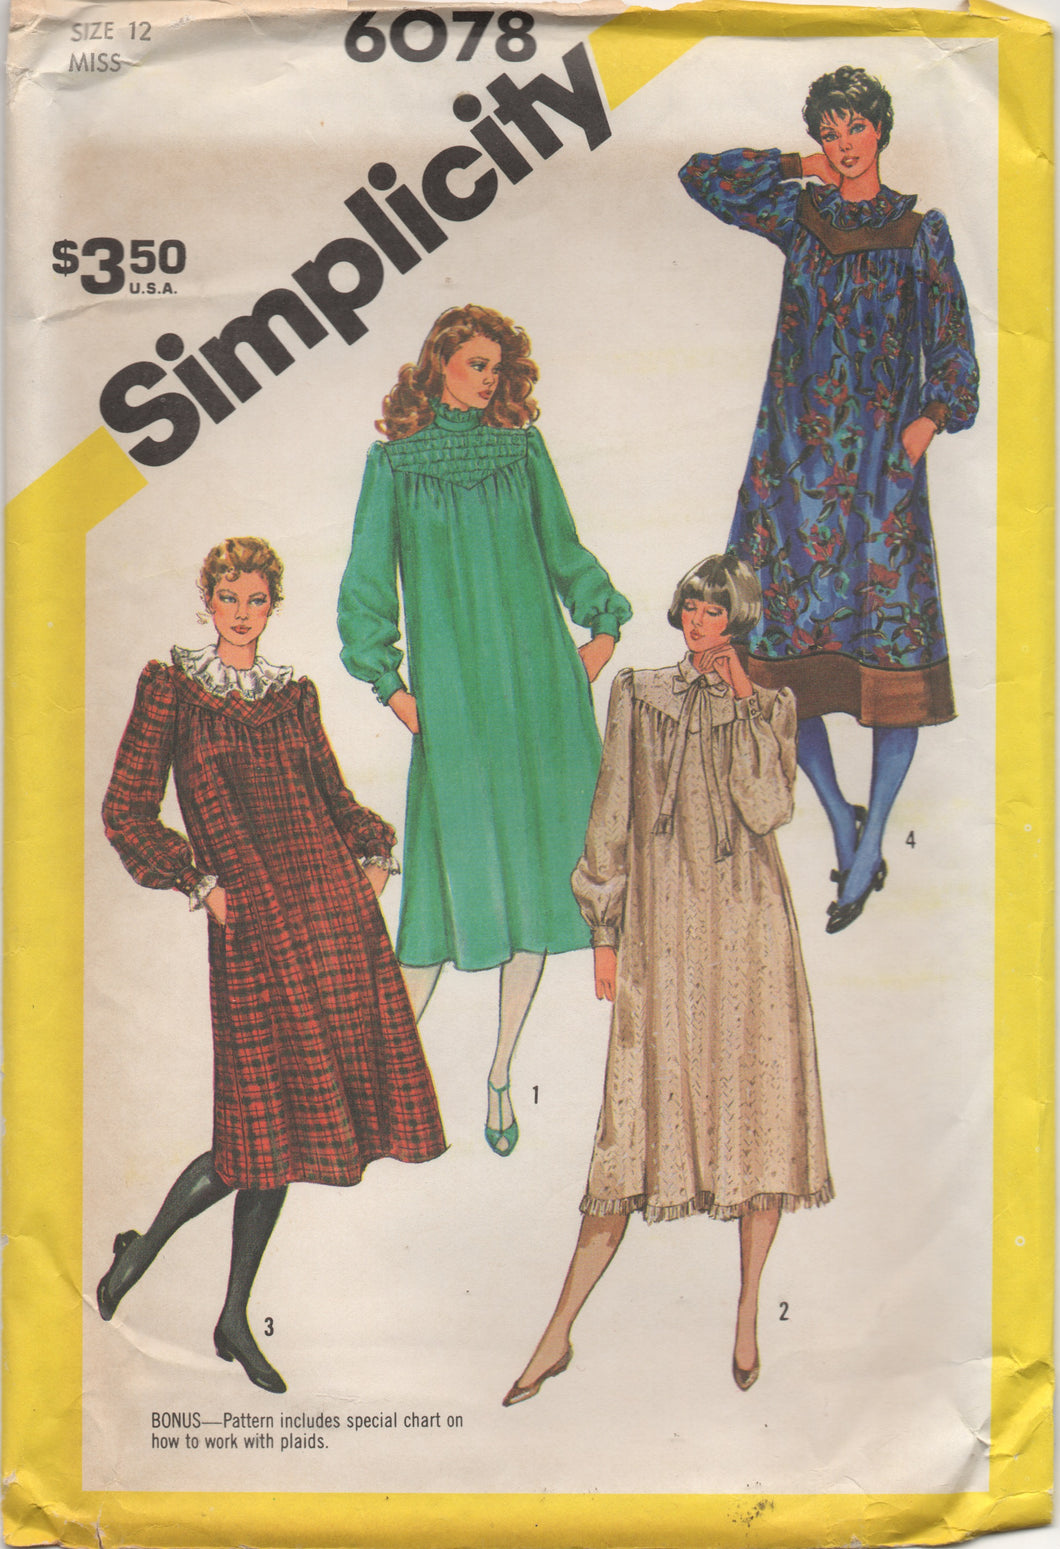 1980's Simplicity Large Yoked Dress Pattern with Ruffle Collar and Pockets - Bust 34